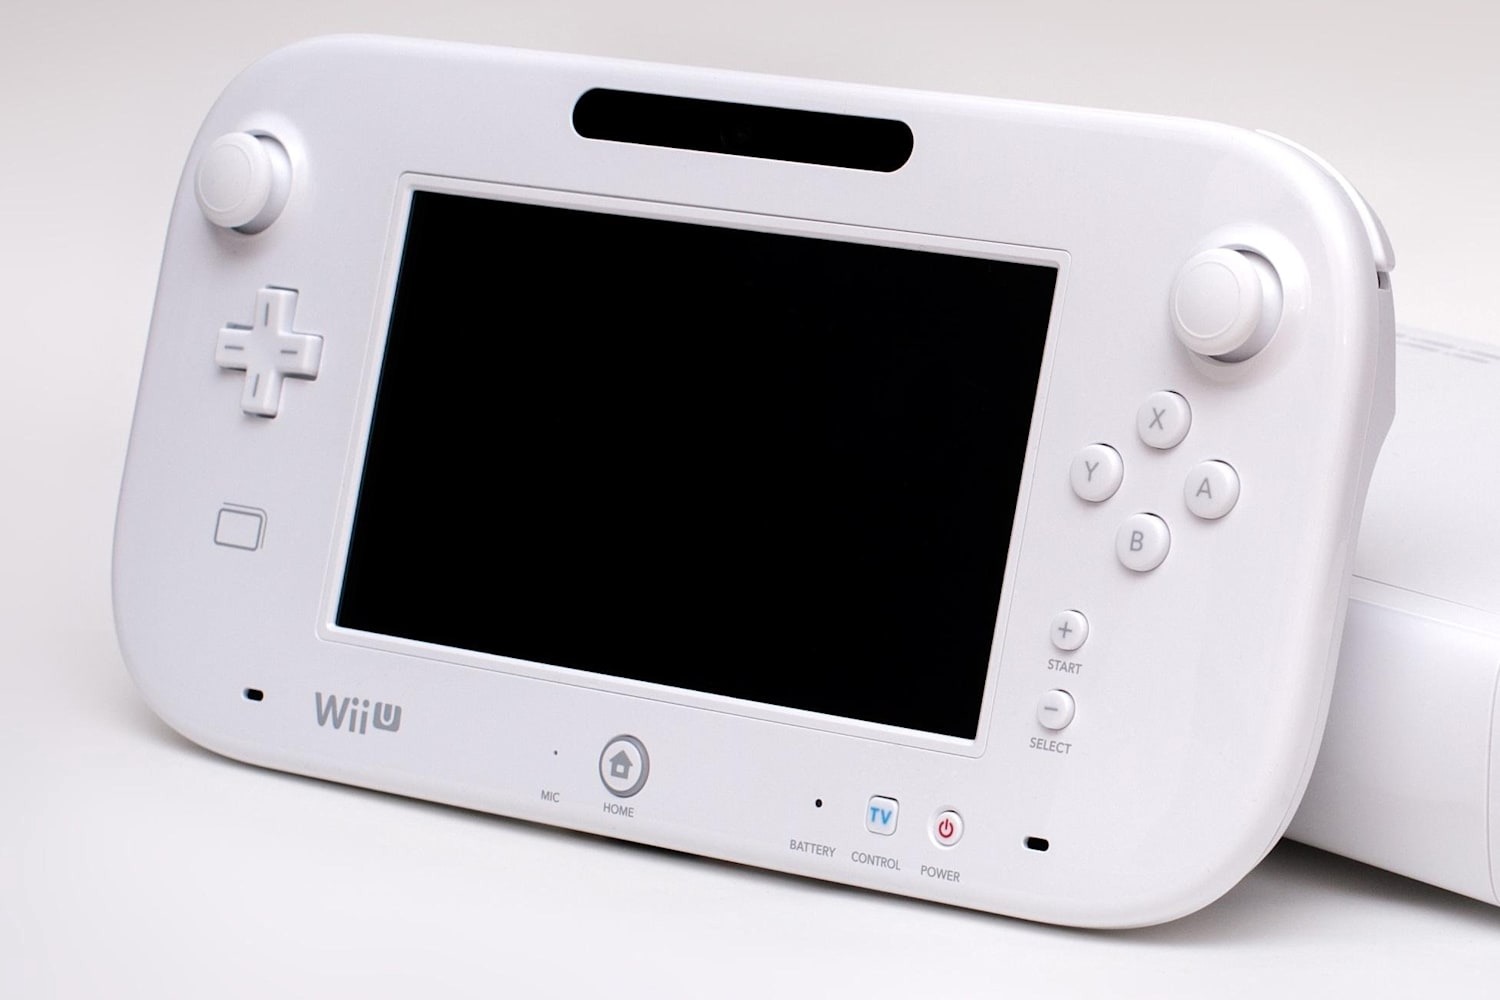 wii-u-gamepad-doesnt-light-up-when-plugged-in